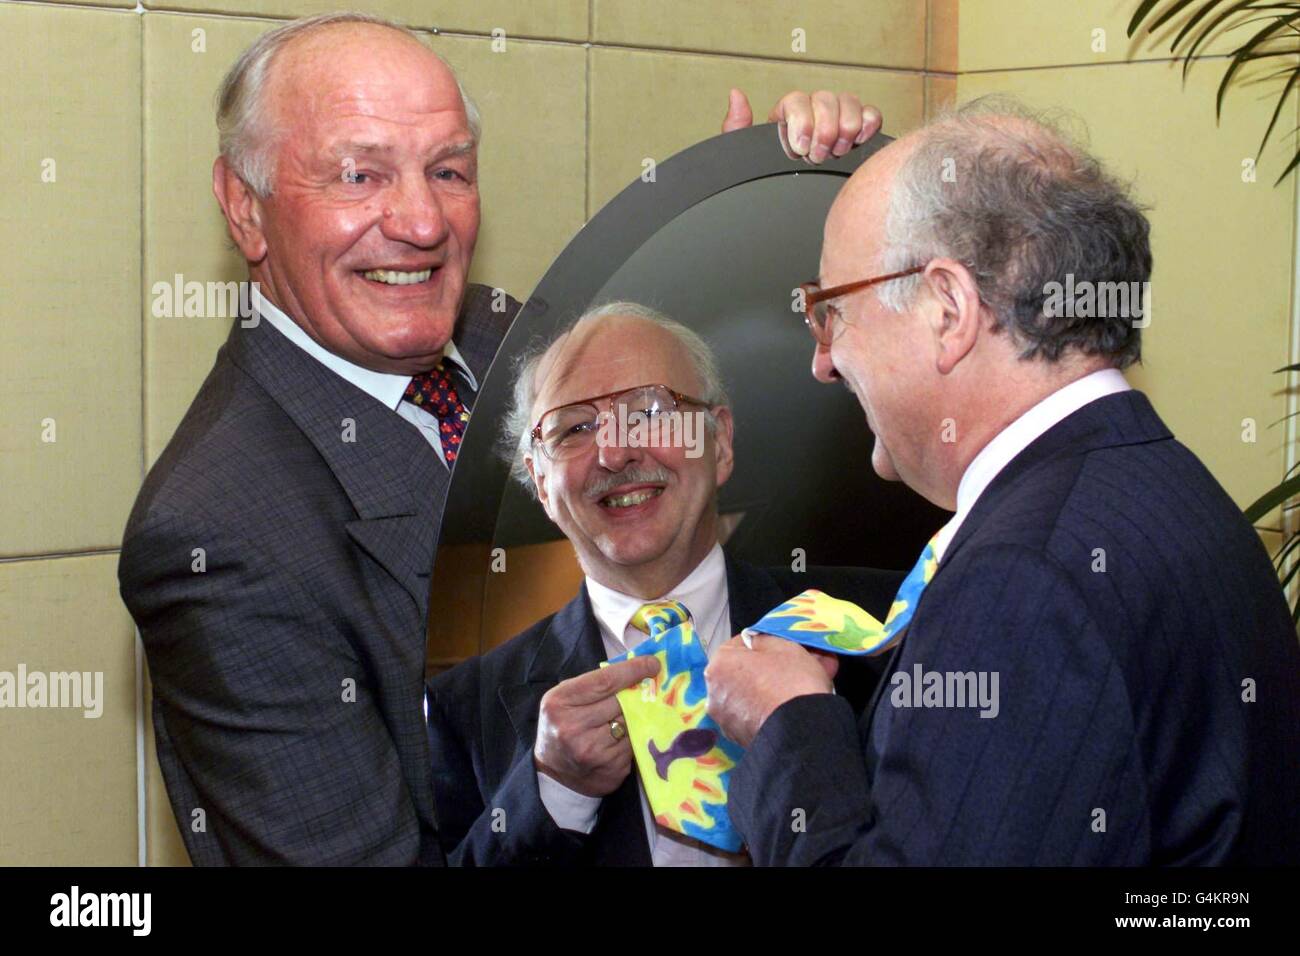 TV weatherman Michael Fish (right) and former boxer Henry Cooper were among those who collected awards as the country's best tie wearers. They received their Top of the Knots award - a gold tie pin - from the Guild of British Tie Makers at a London reception. Stock Photo